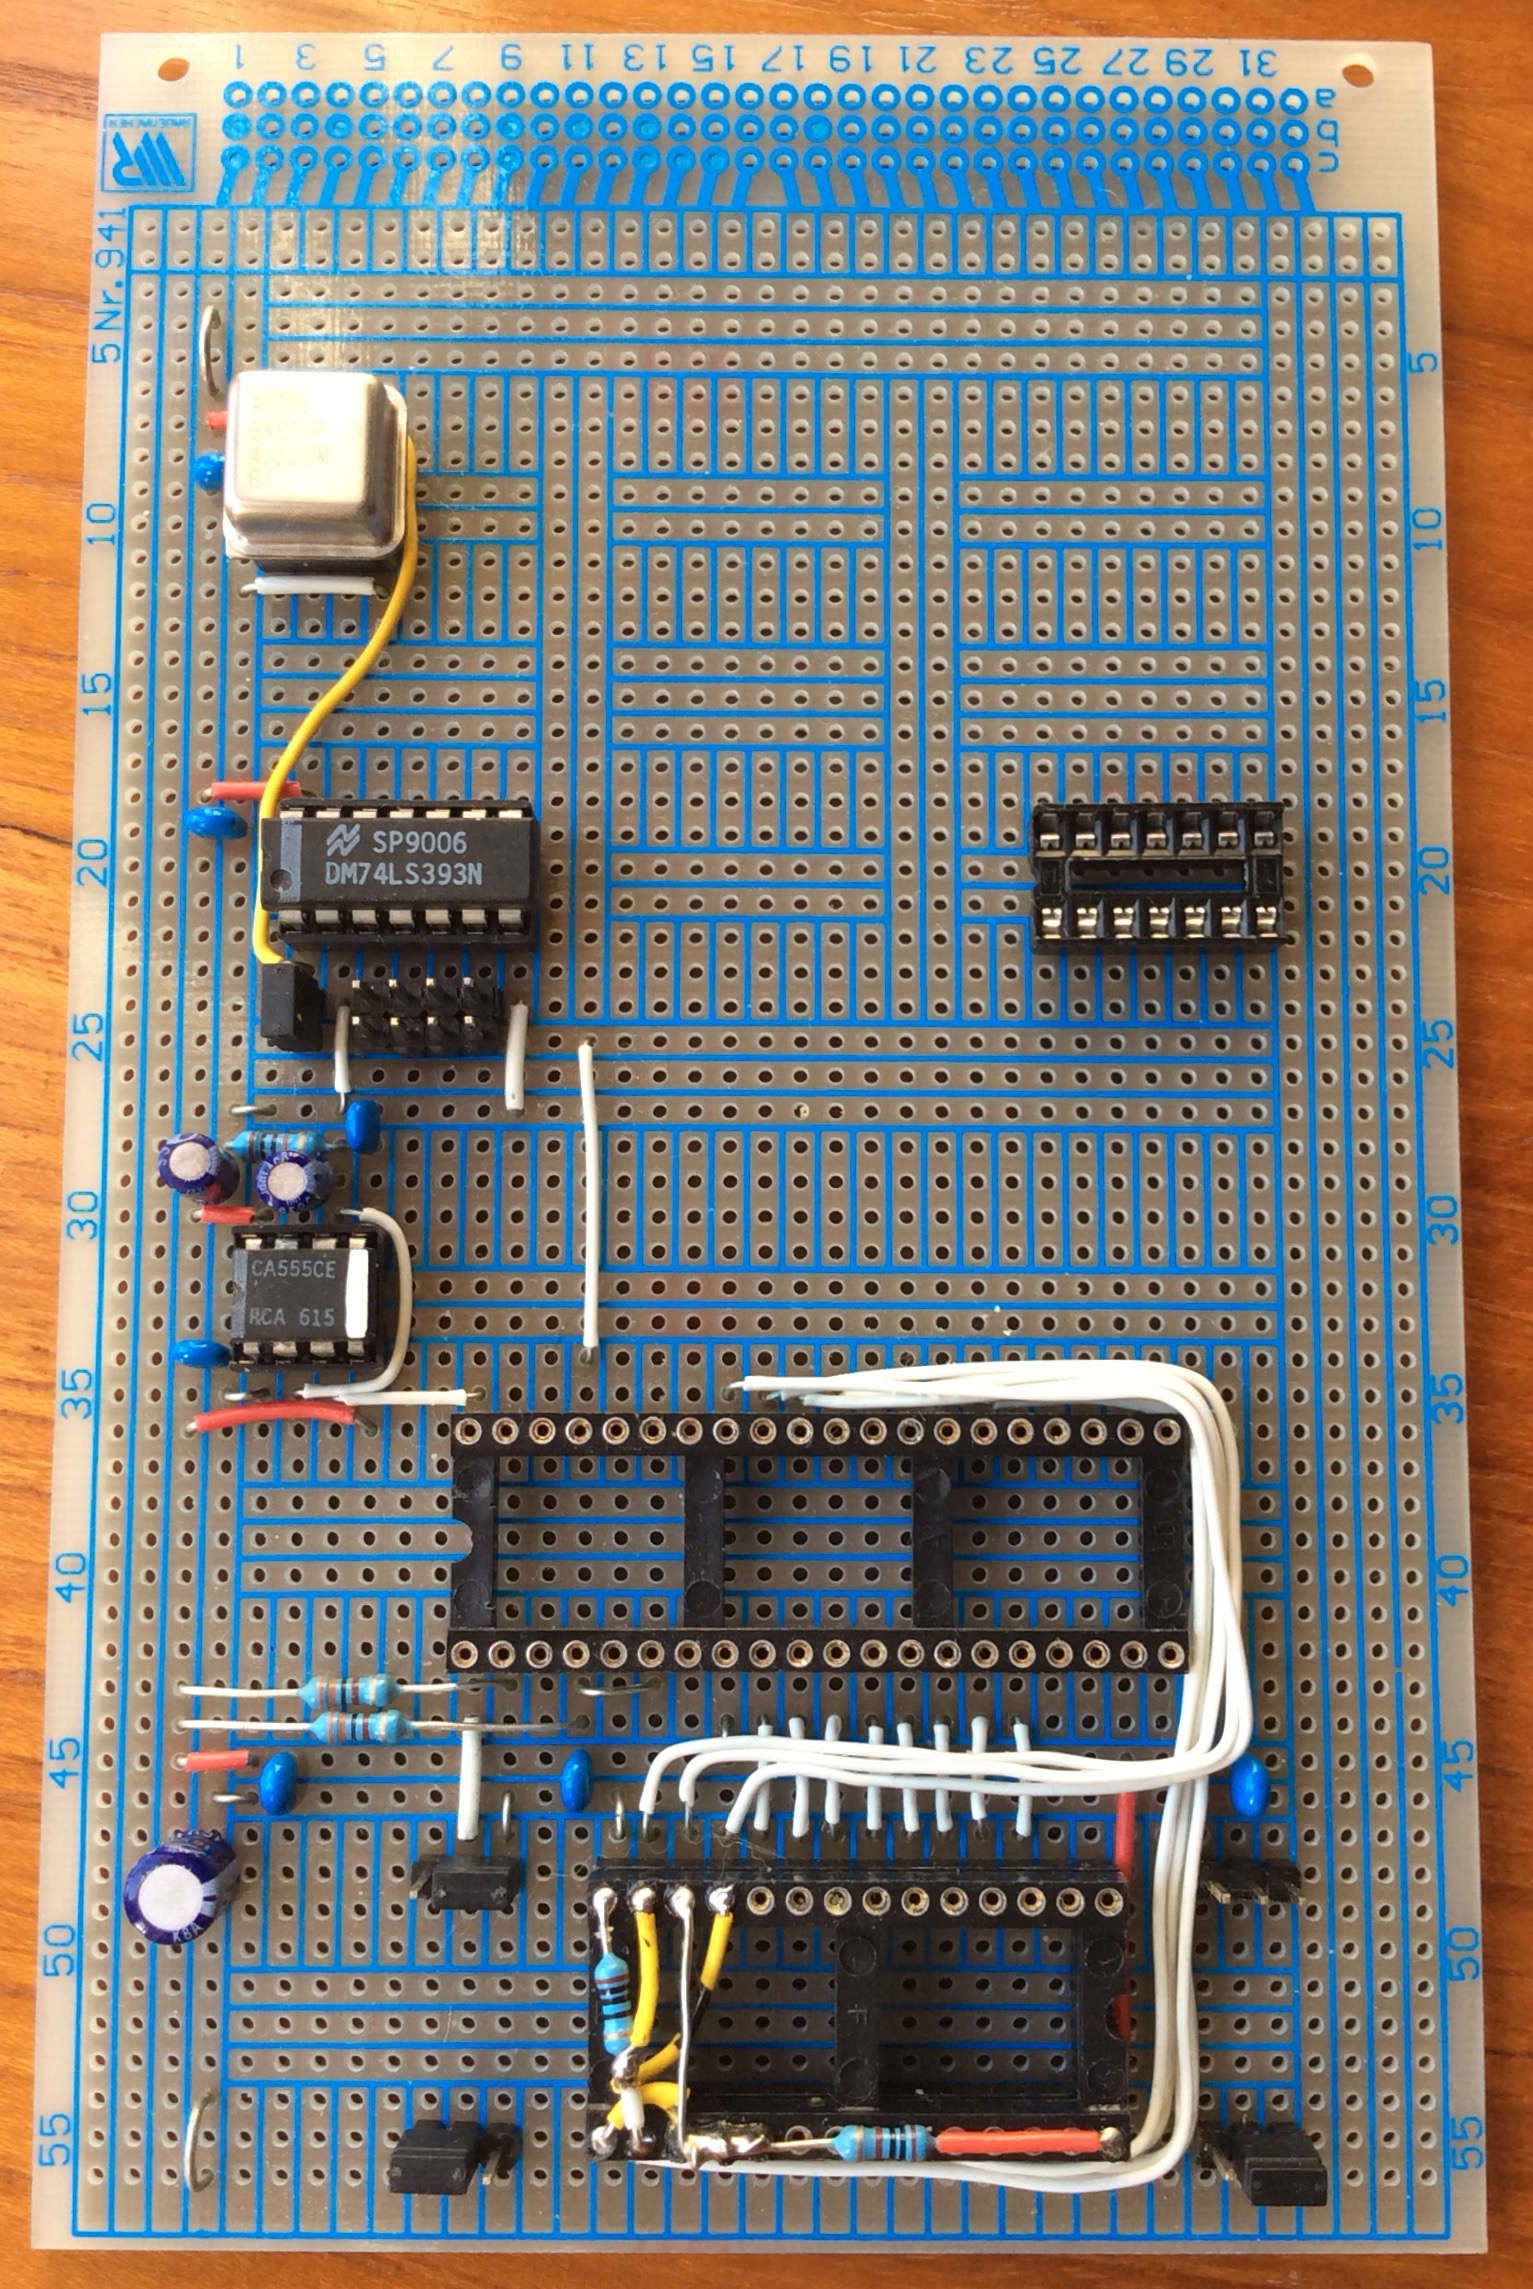 6502 / 65C02 chip testing board complete with a NOP generator!